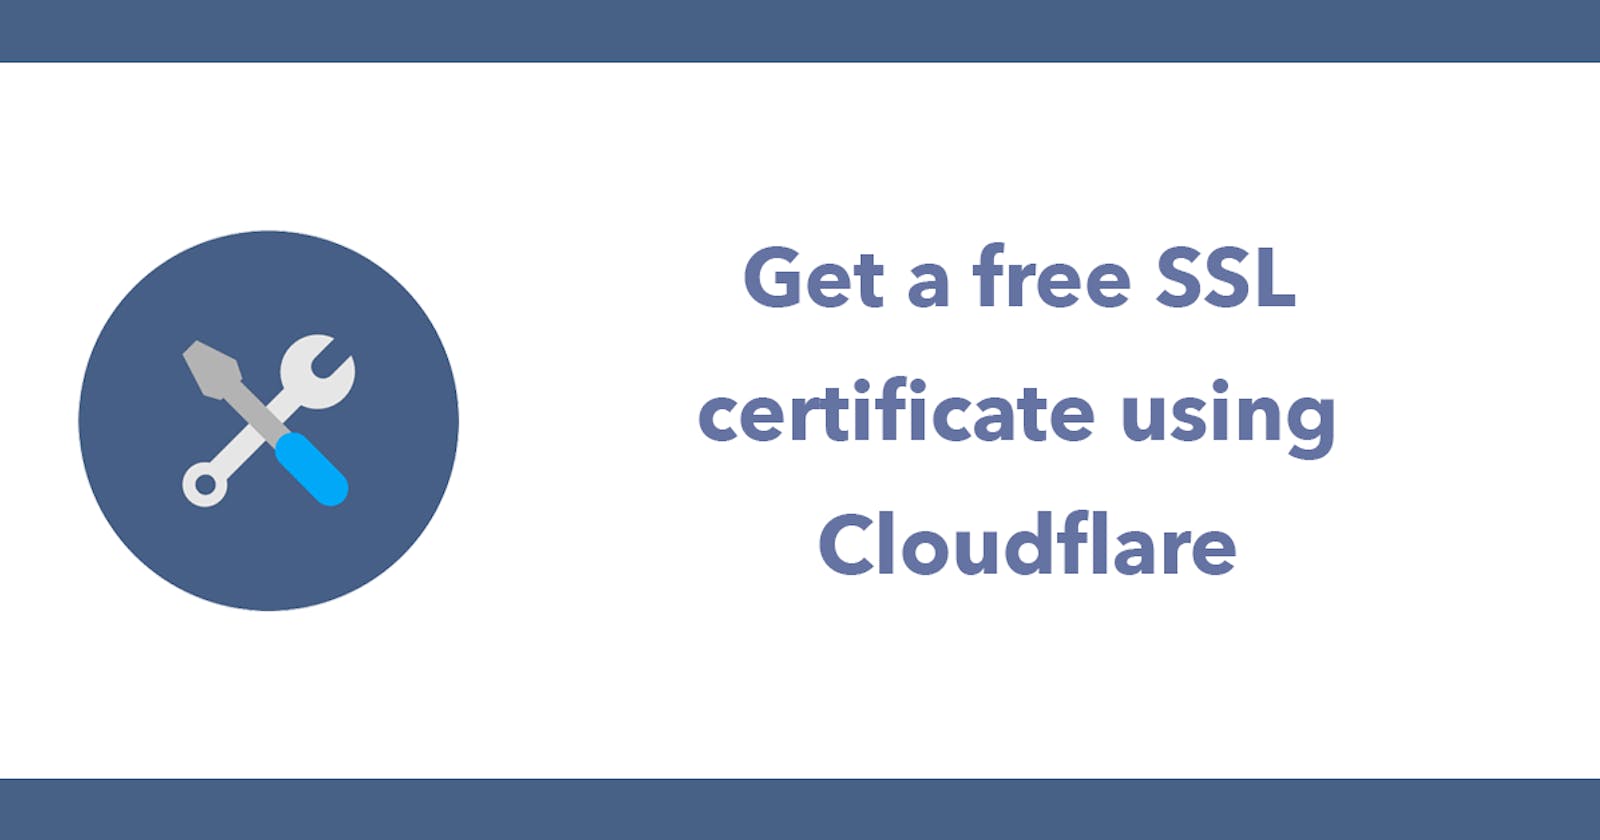 Get a free SSL certificate using Cloudflare